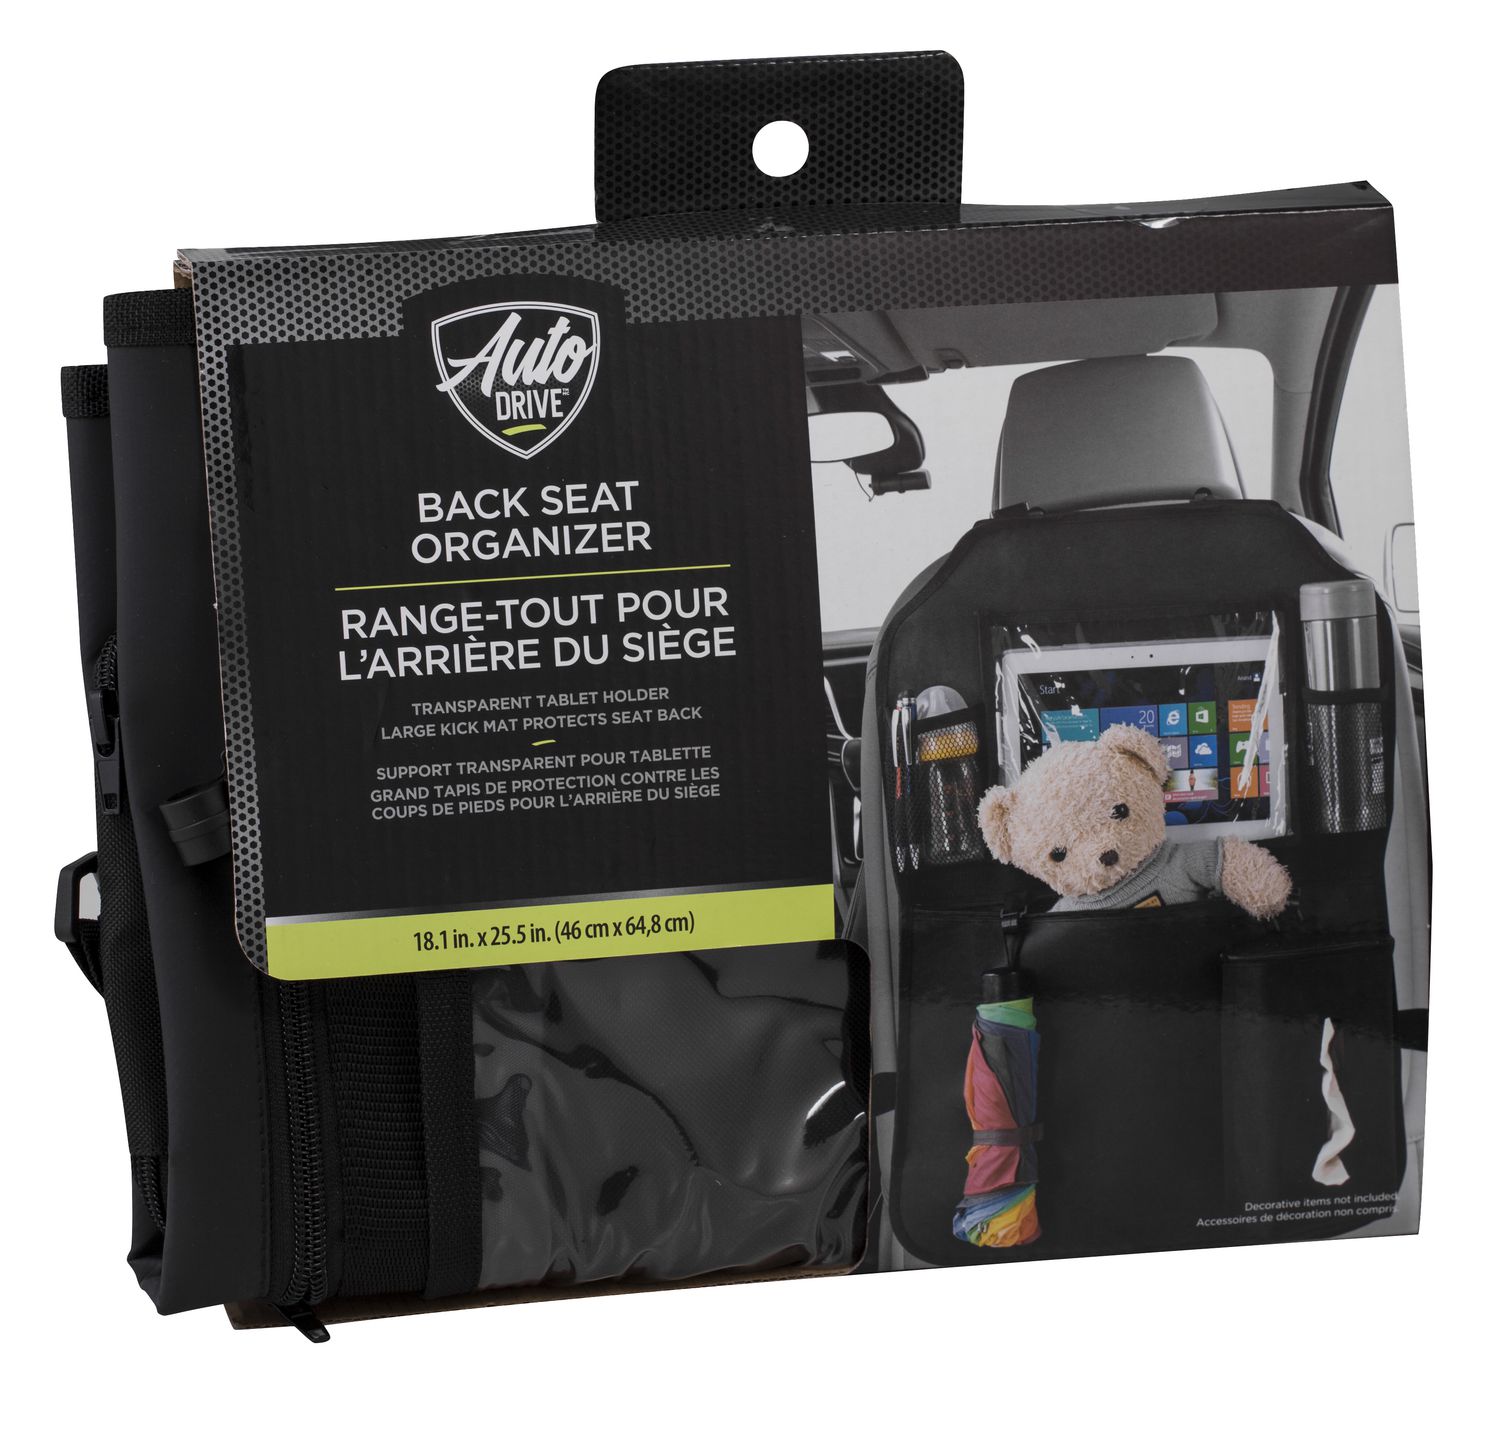 AUTO DRIVE Backseat Organizer with Kick Mat and Tablet Holder Tissue holder  Included, 18.1 in. W x 25.5 in. H